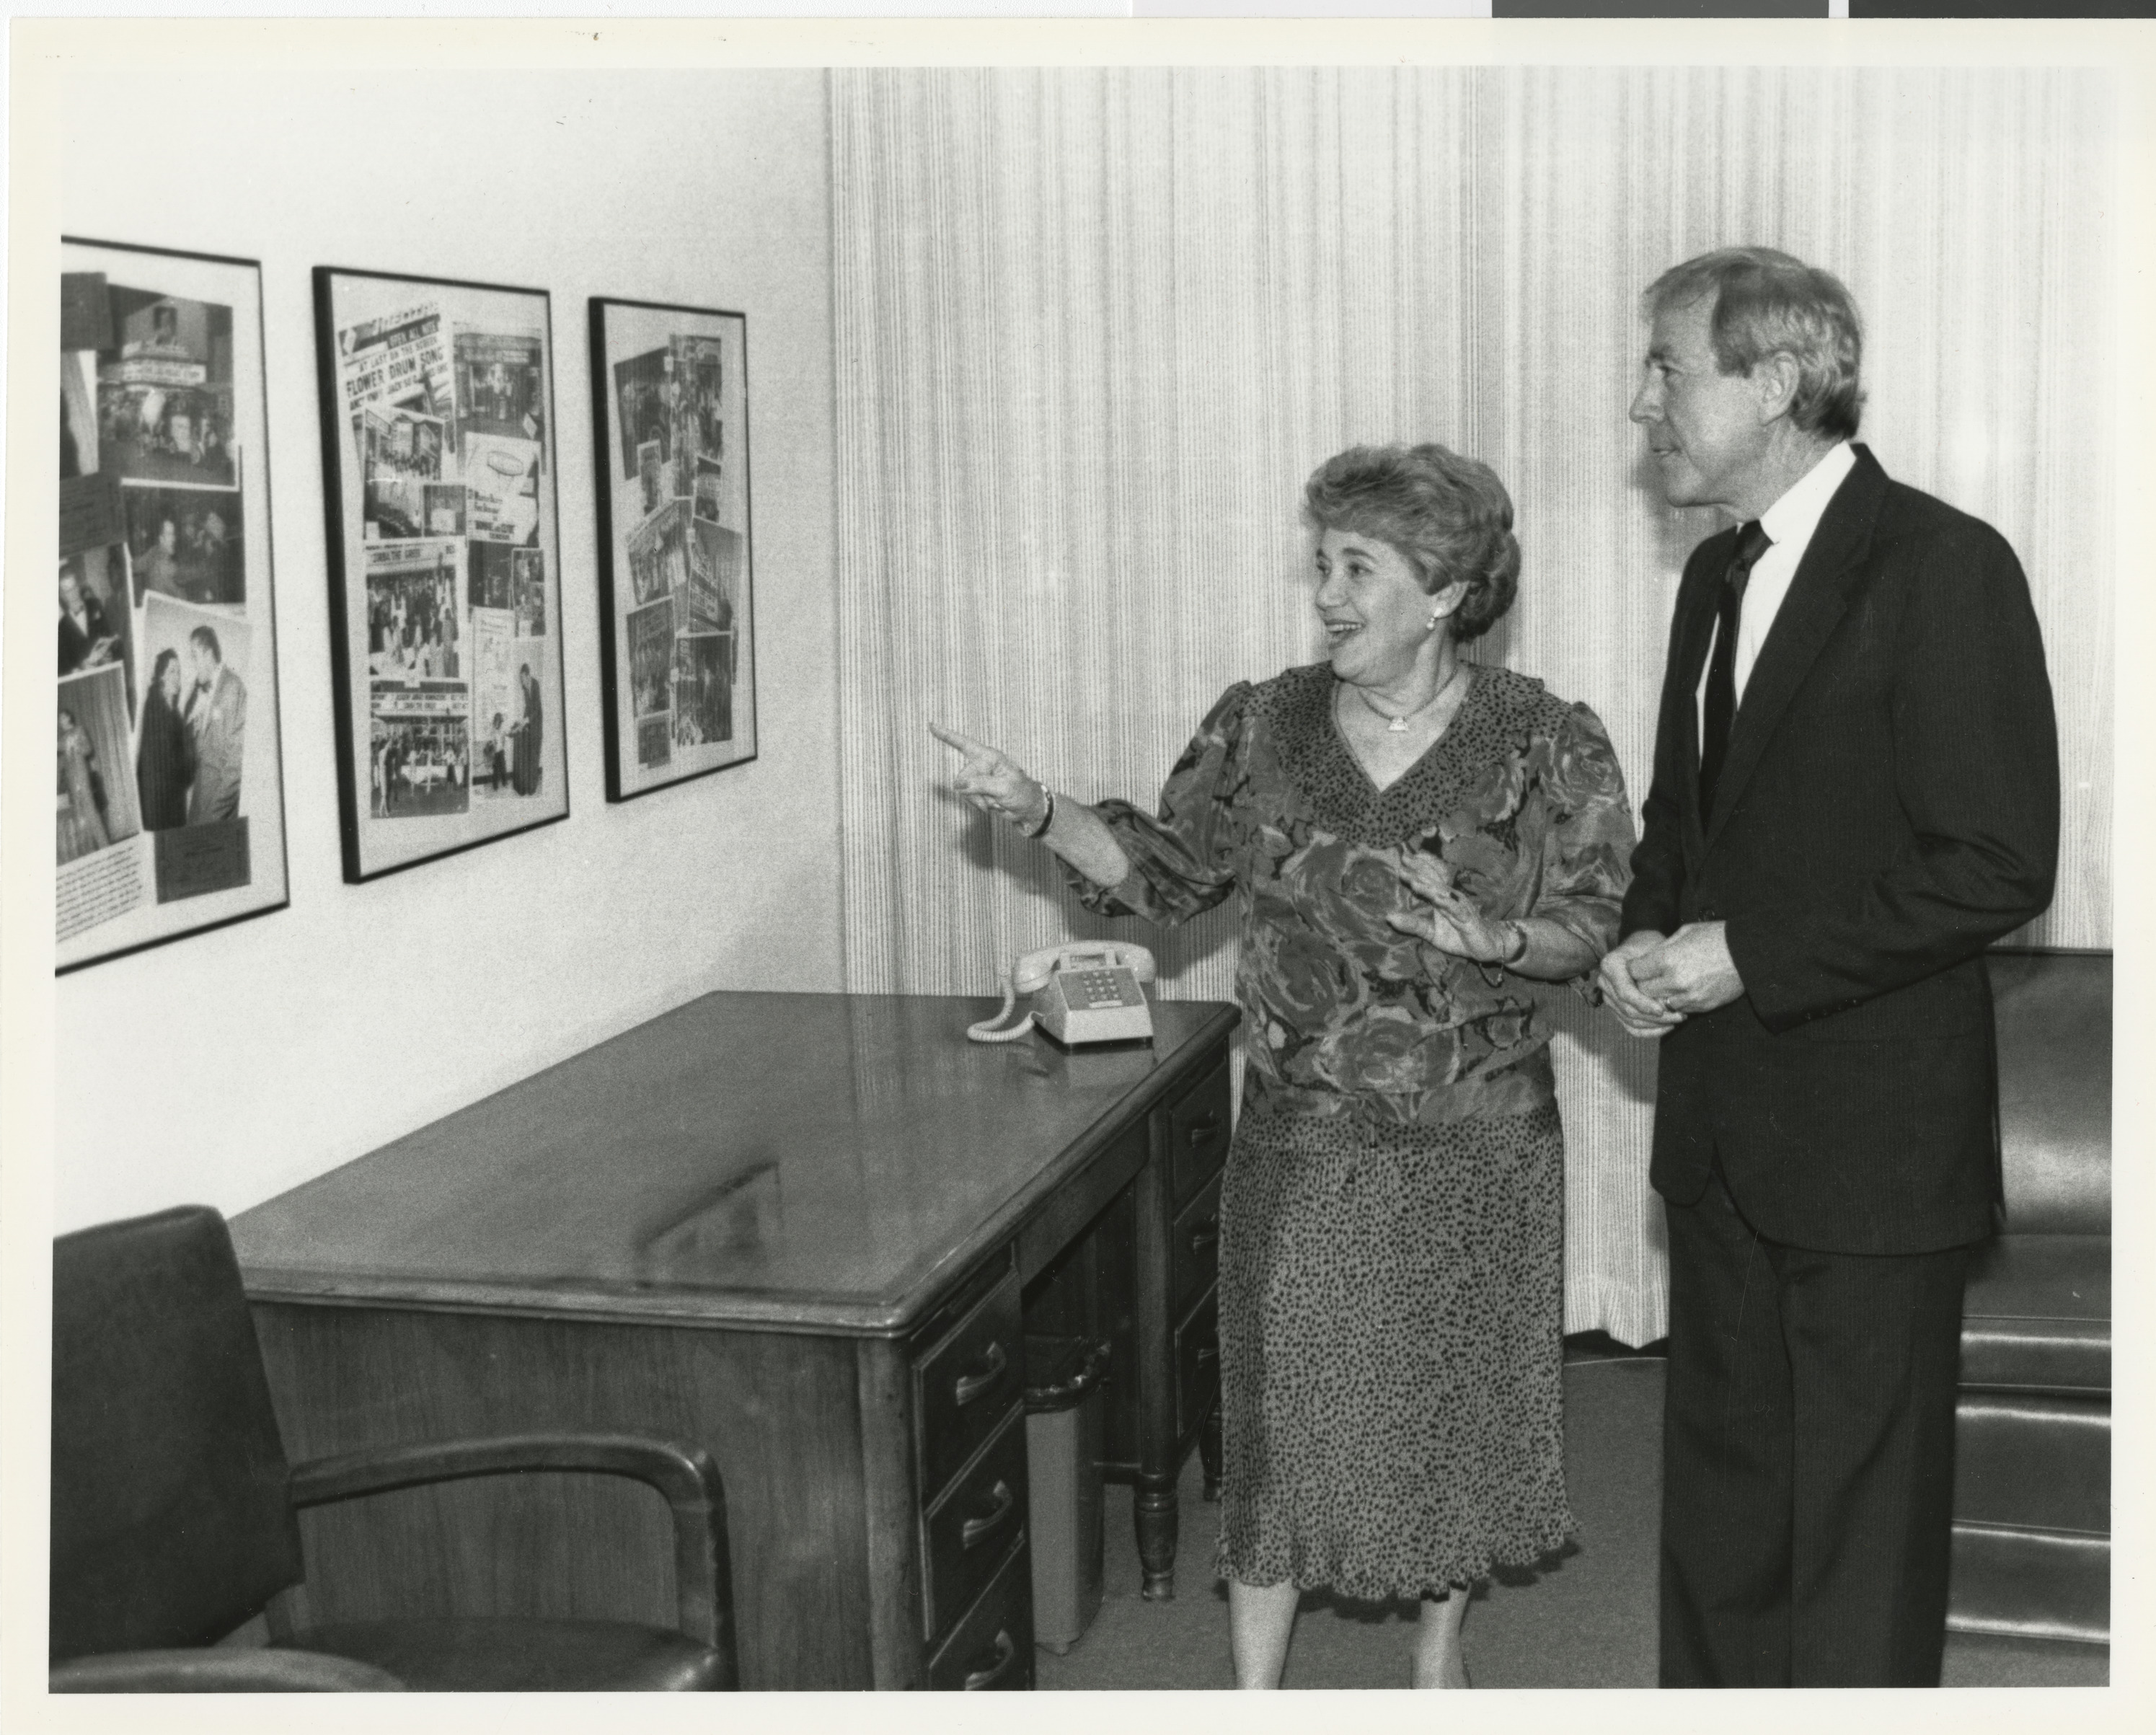 Photograph of Edythe Katz presenting collages at the Lloyd Katz Honors Lounge at UNLV Library